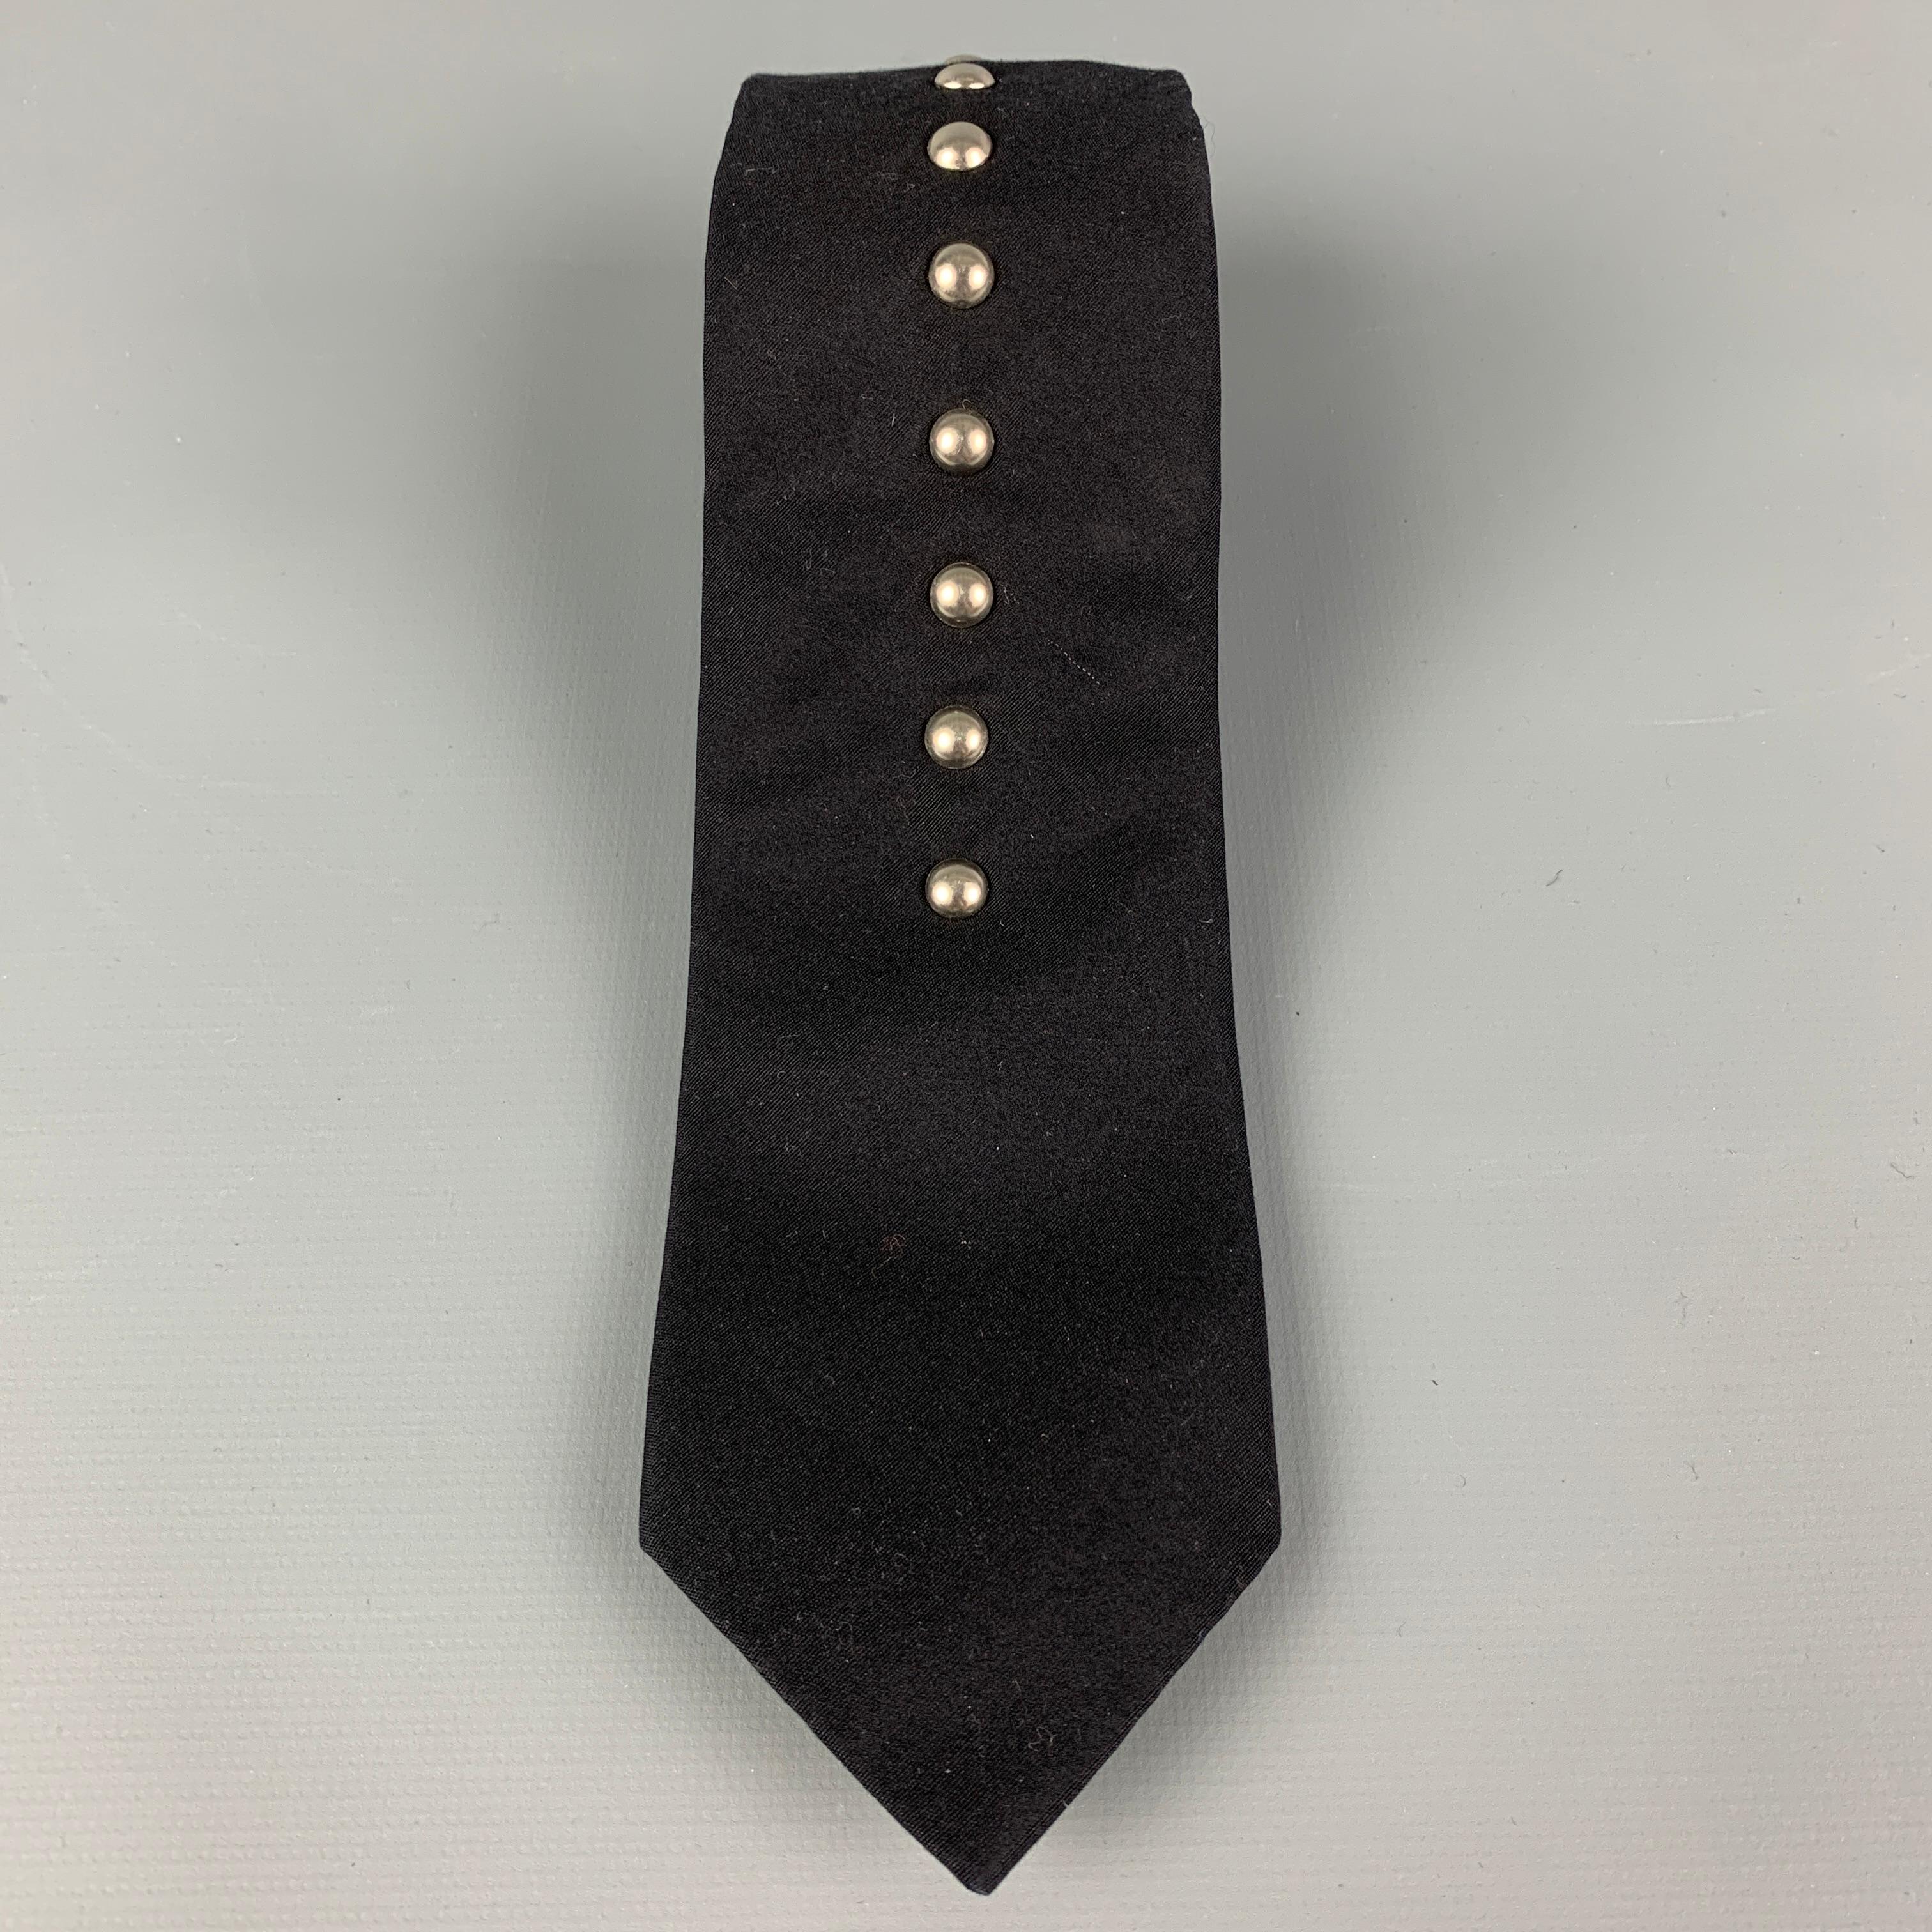 COMME des GARCONS HOMME PLUS skinny necktie comes in a black material featuring a 10 silver tone studded design. 

Very Good Pre-Owned Condition.

Measurements:

Width: 2.5 in. 